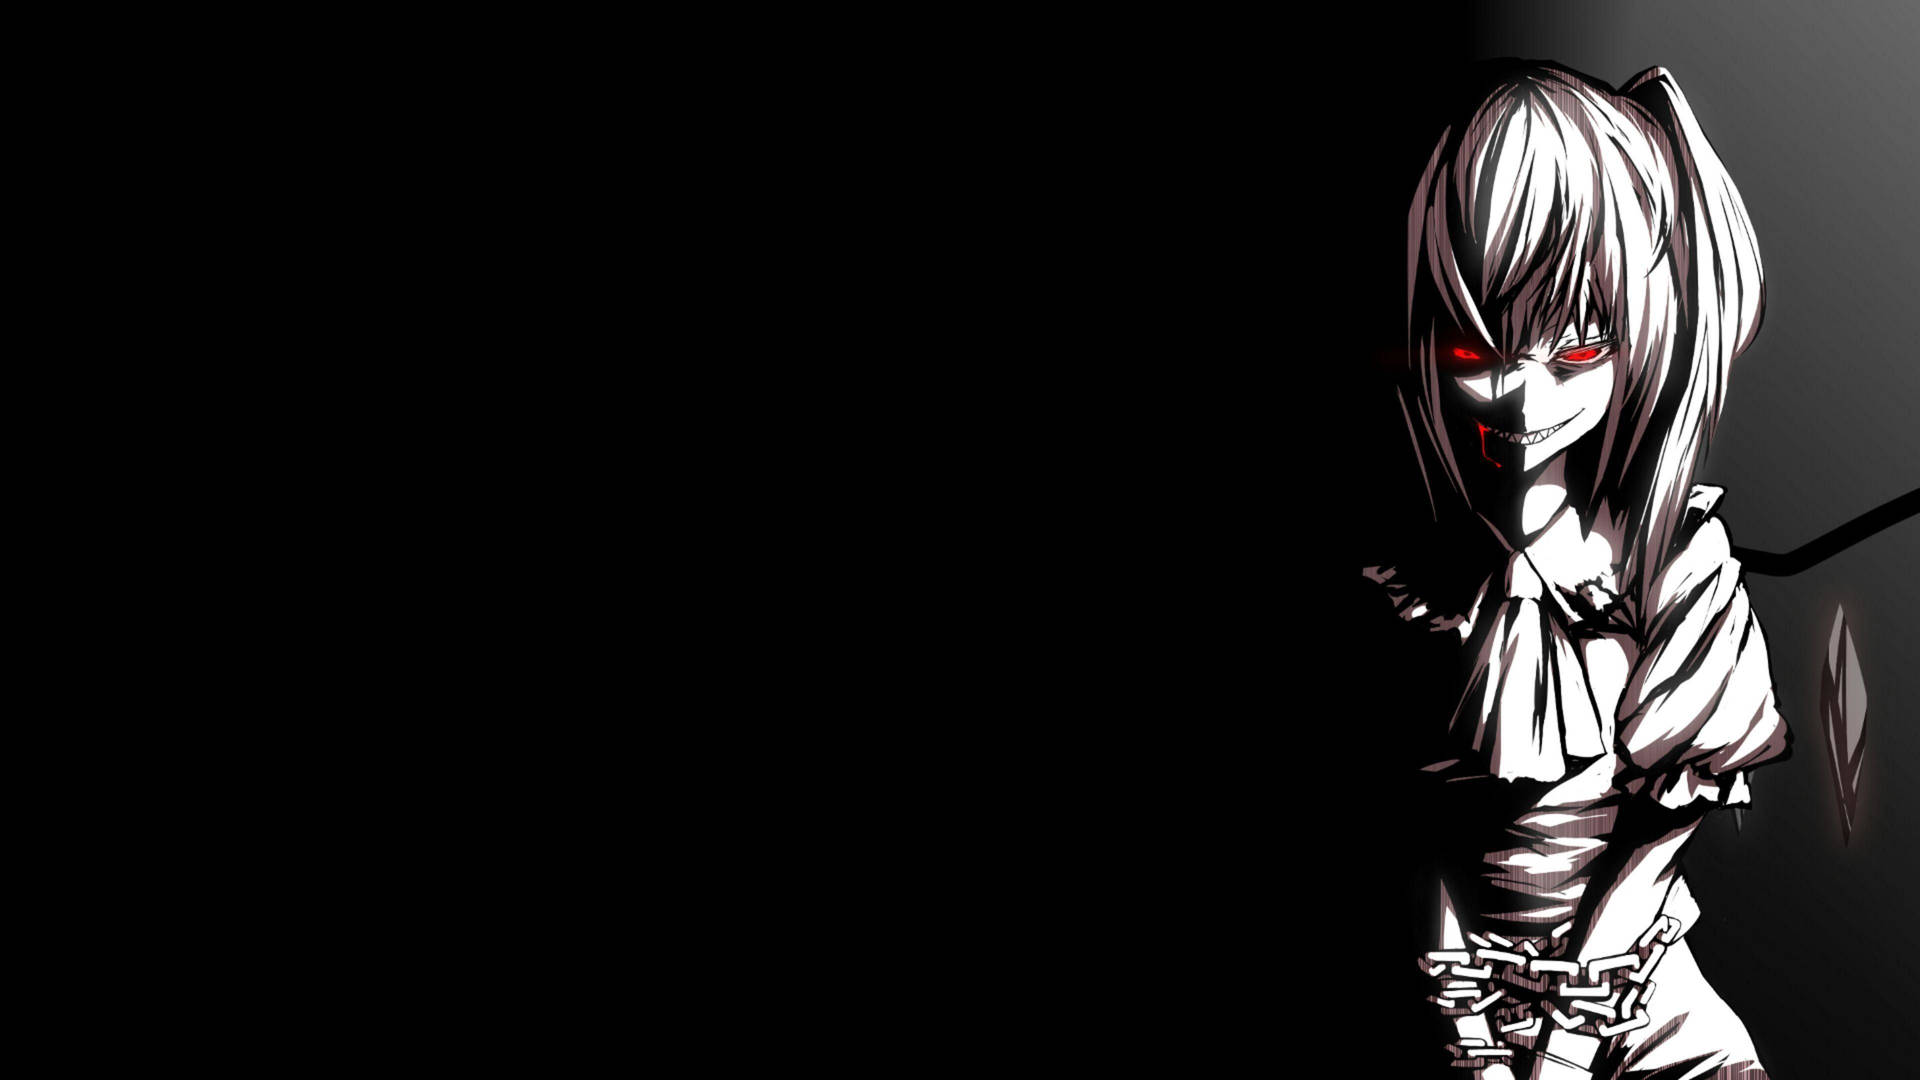 Download Chained Anime Demon Wallpaper | Wallpapers.com